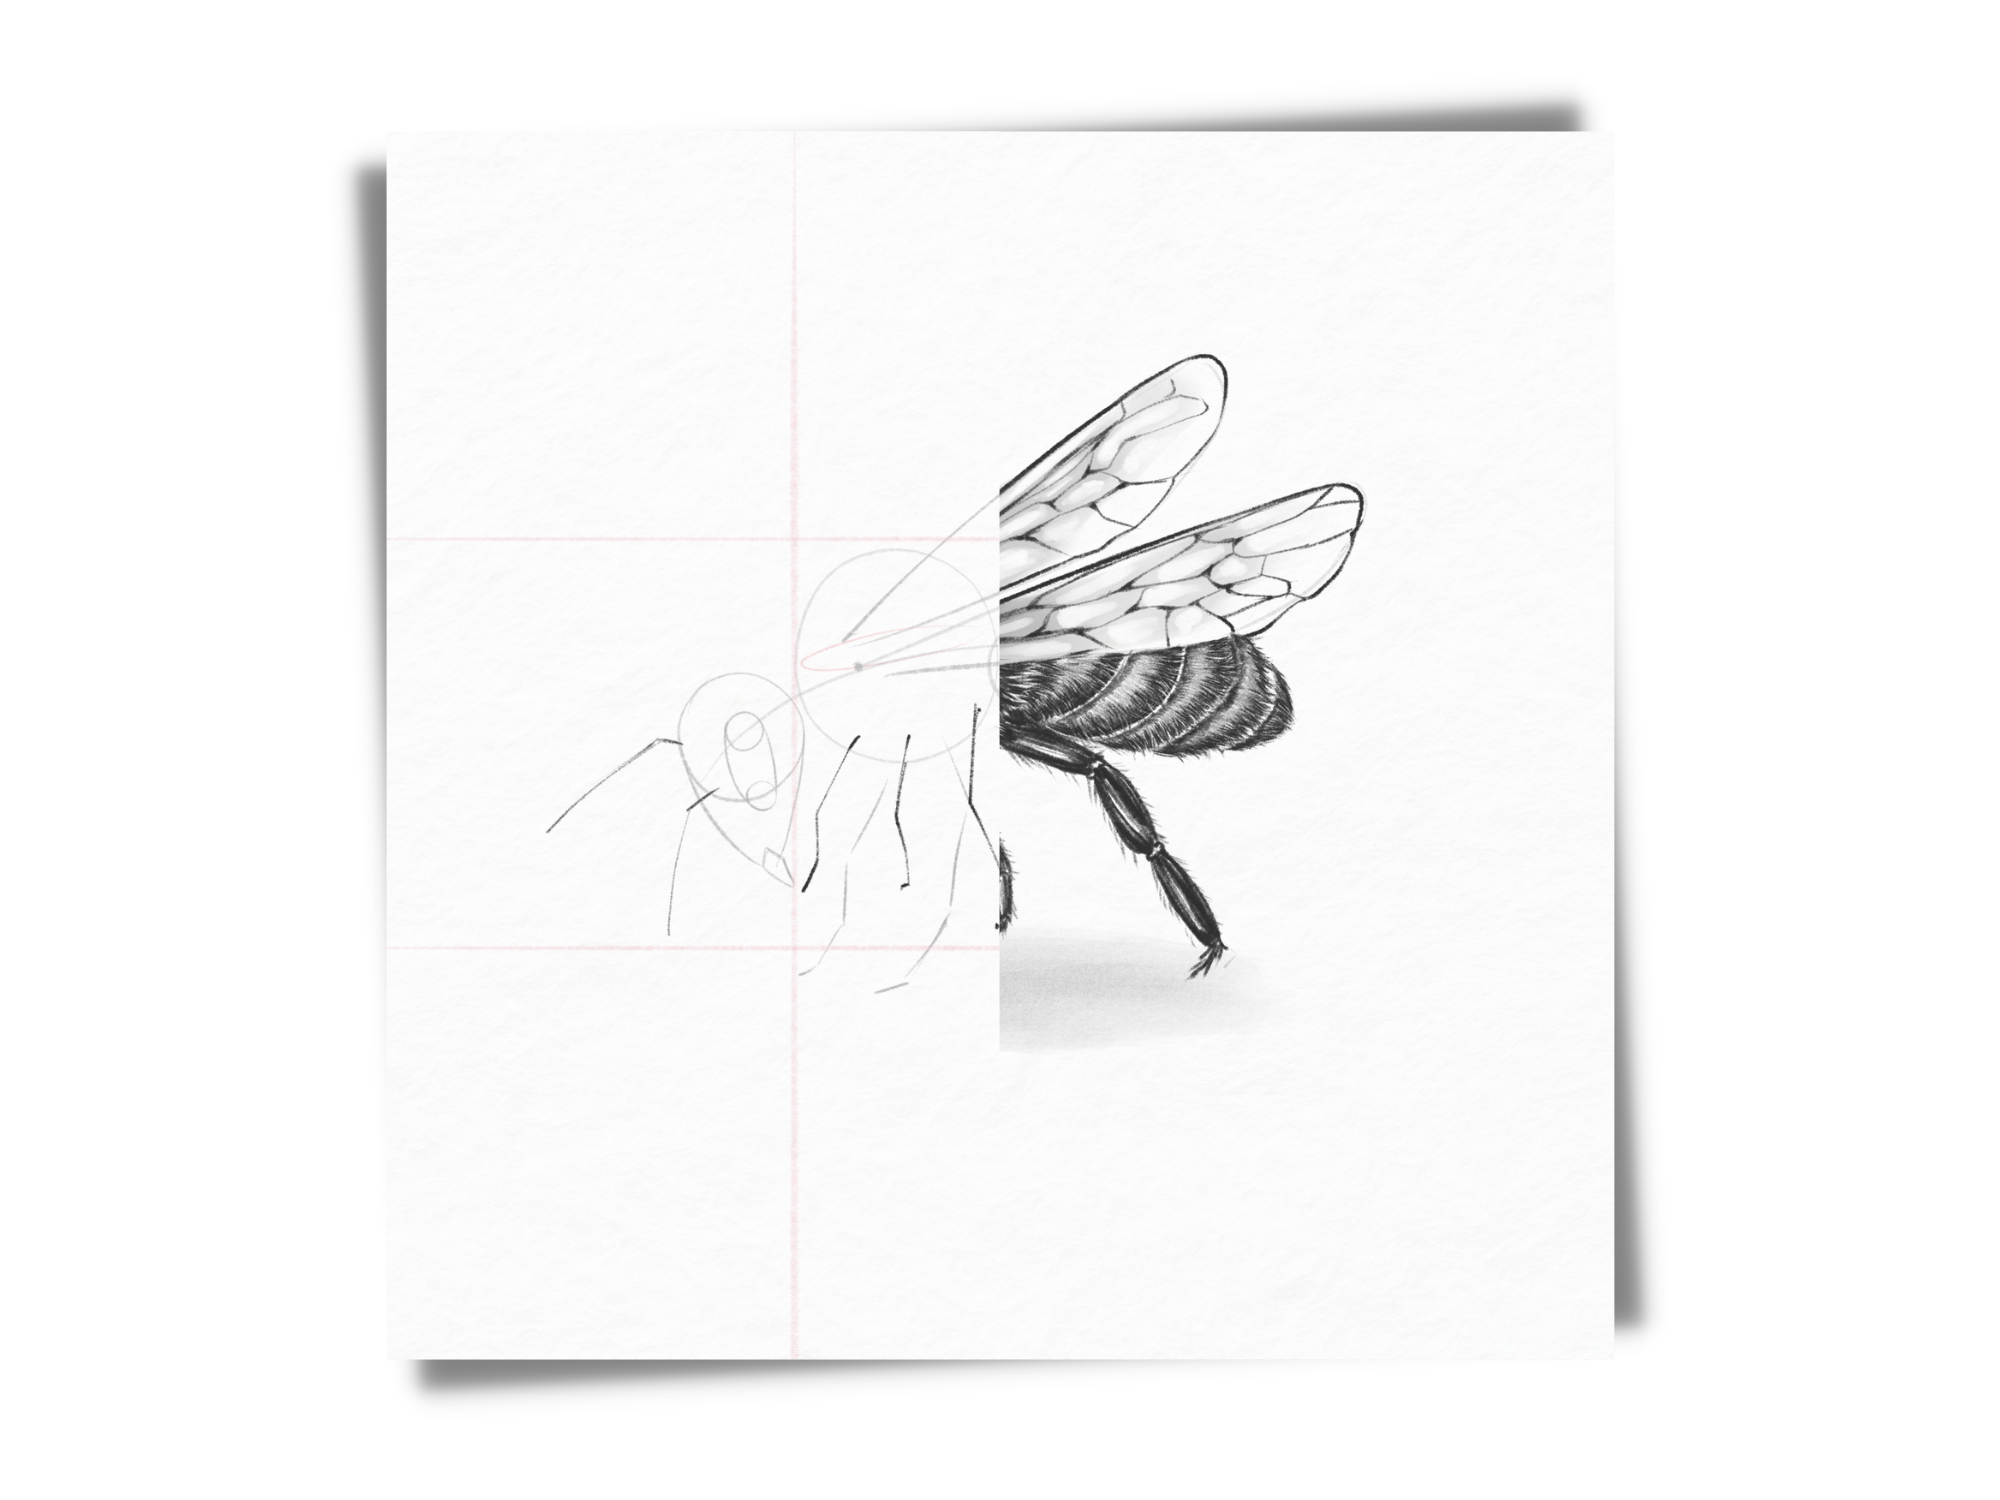 how to draw a bee